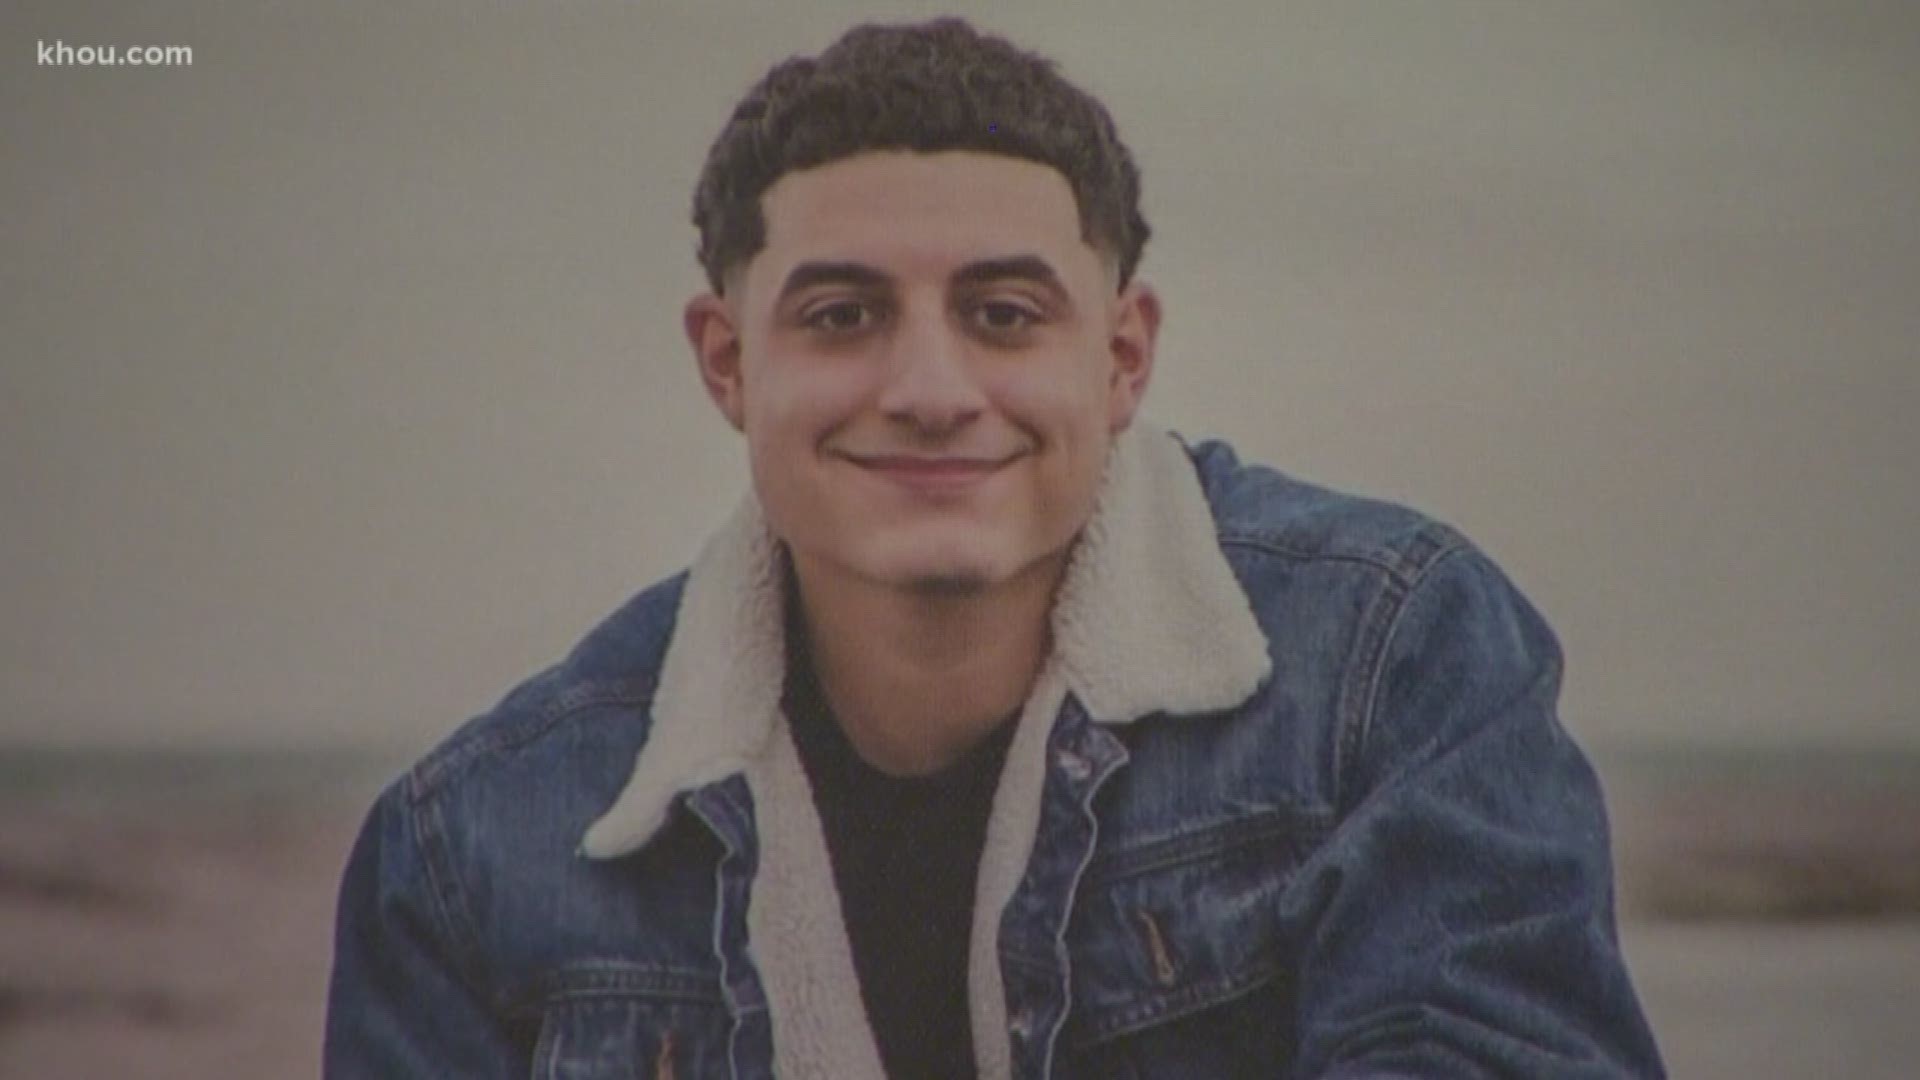 Parents speak about losing their son in a DWI crash with hopes his story can save others.